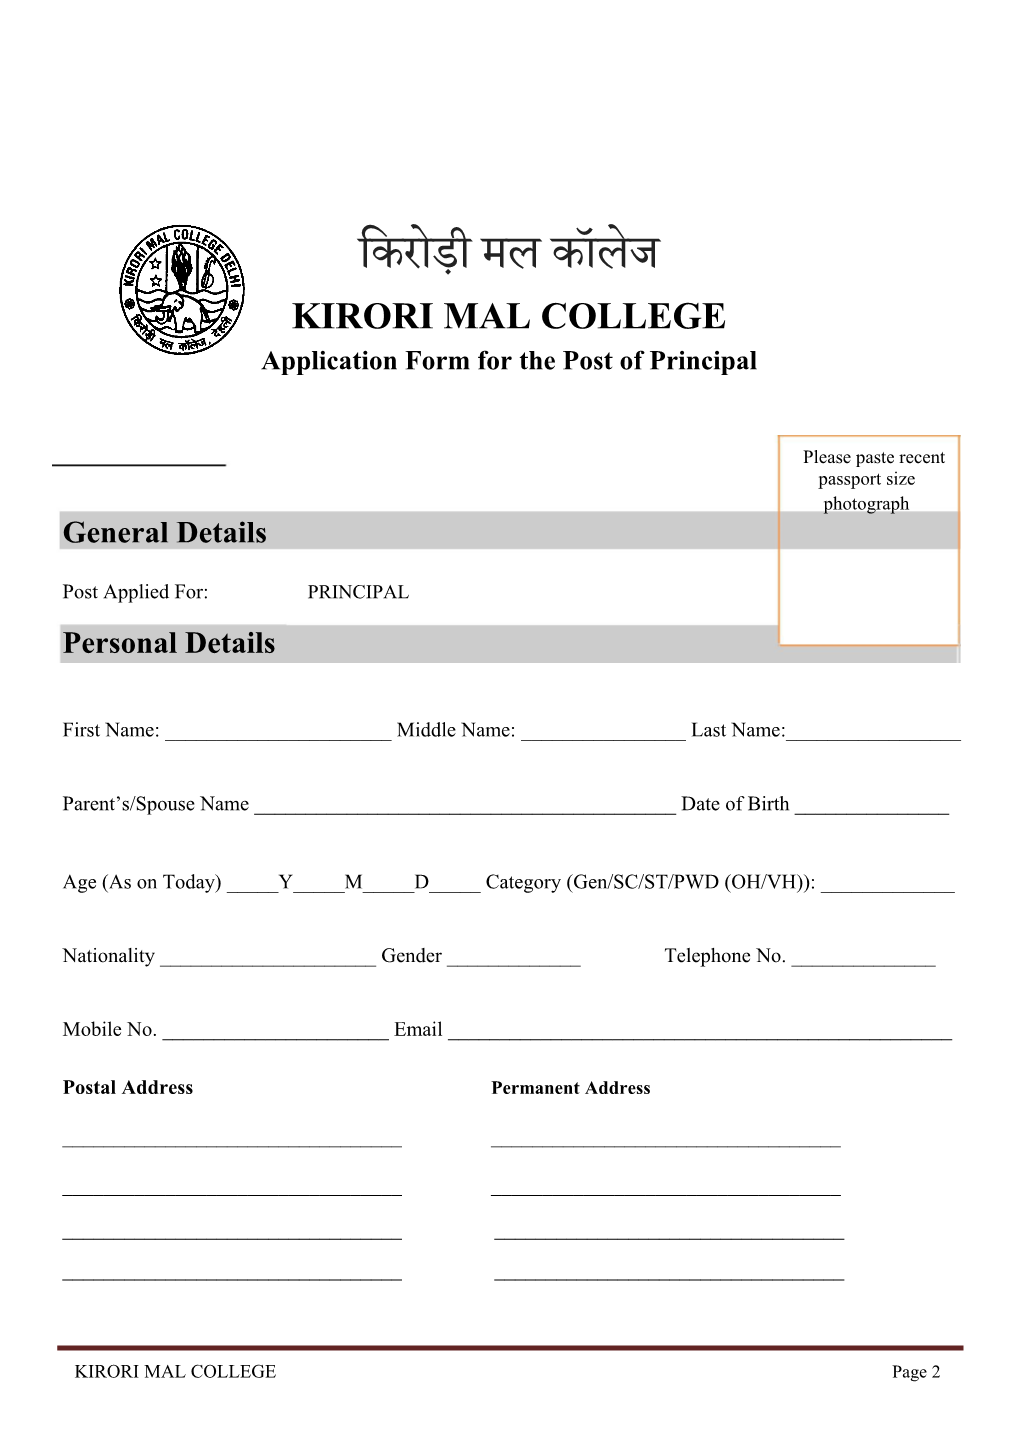 Application Form for the Post of Principal